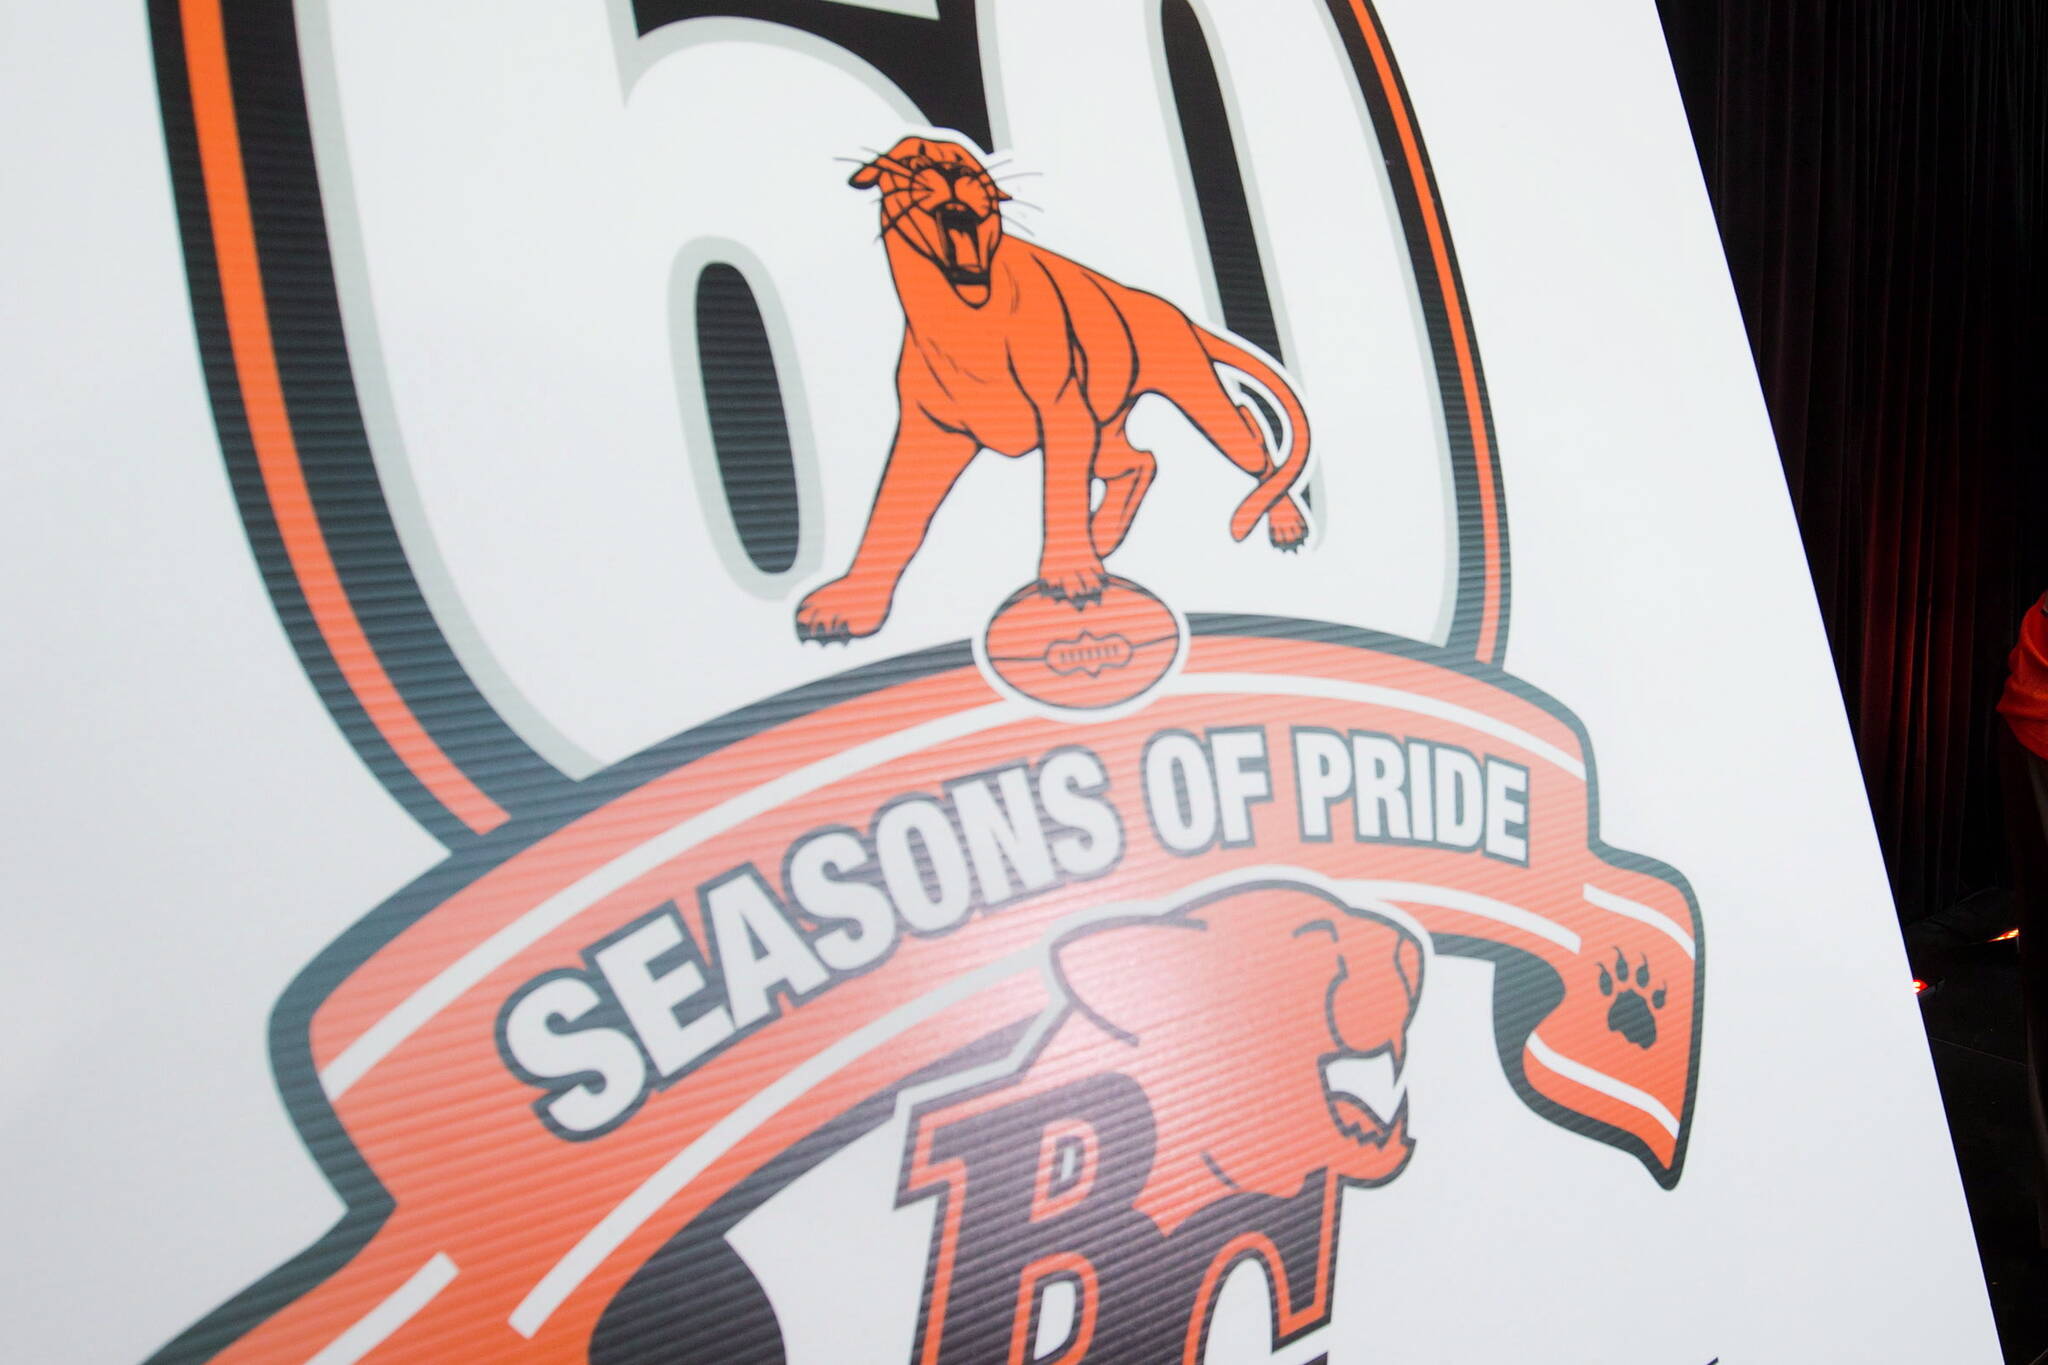 The B.C. Lions unveiled their 60th anniversary logo in Vancouver, on Thursday May 16, 2013. THE CANADIAN PRESS/Darryl Dyck